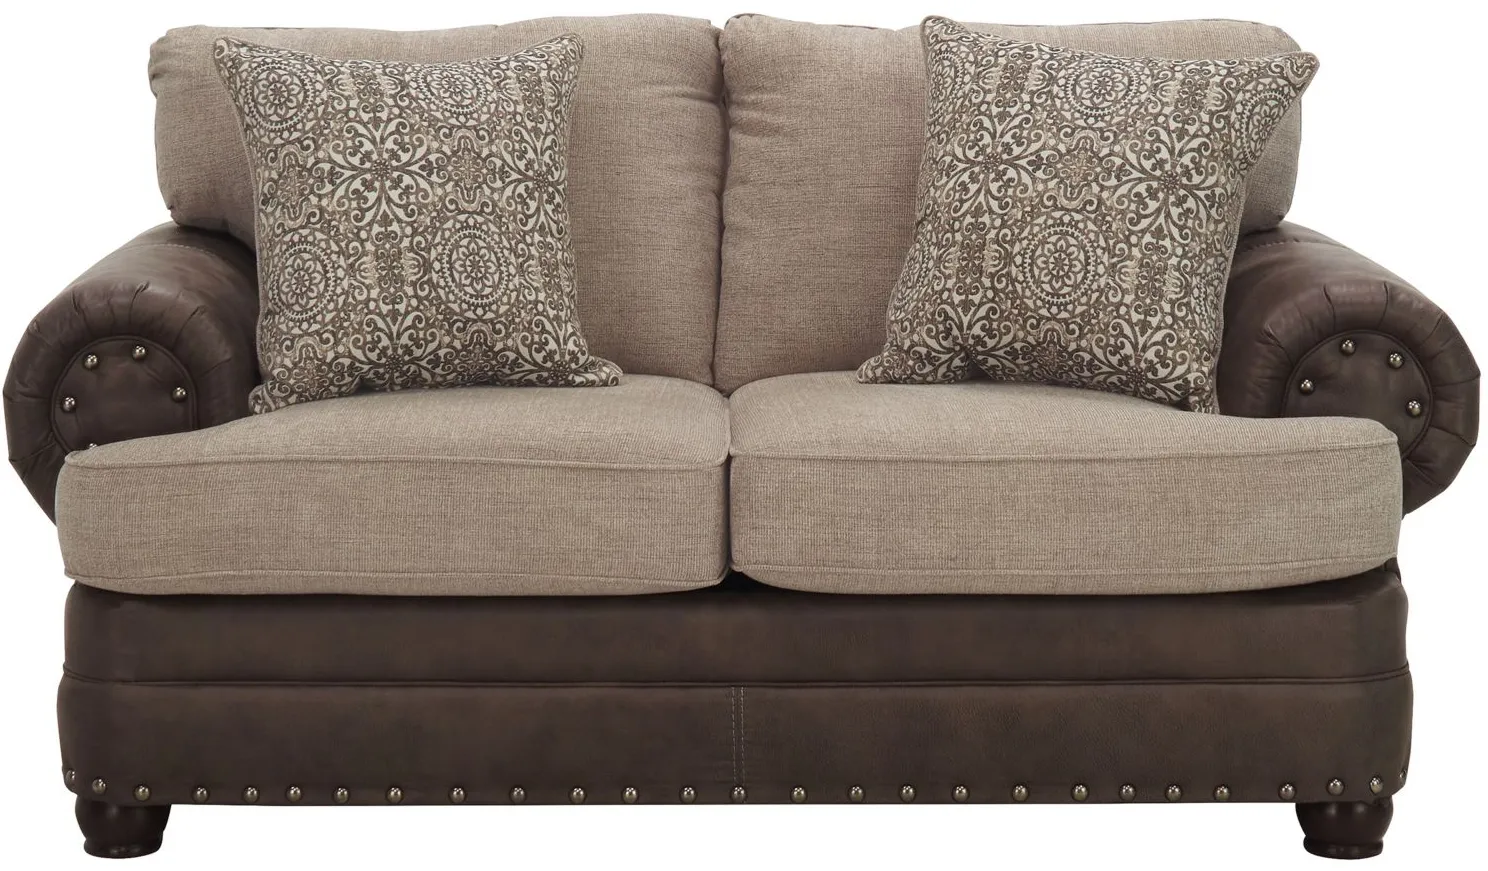 Newman Chenille Loveseat in Gray by Behold Washington